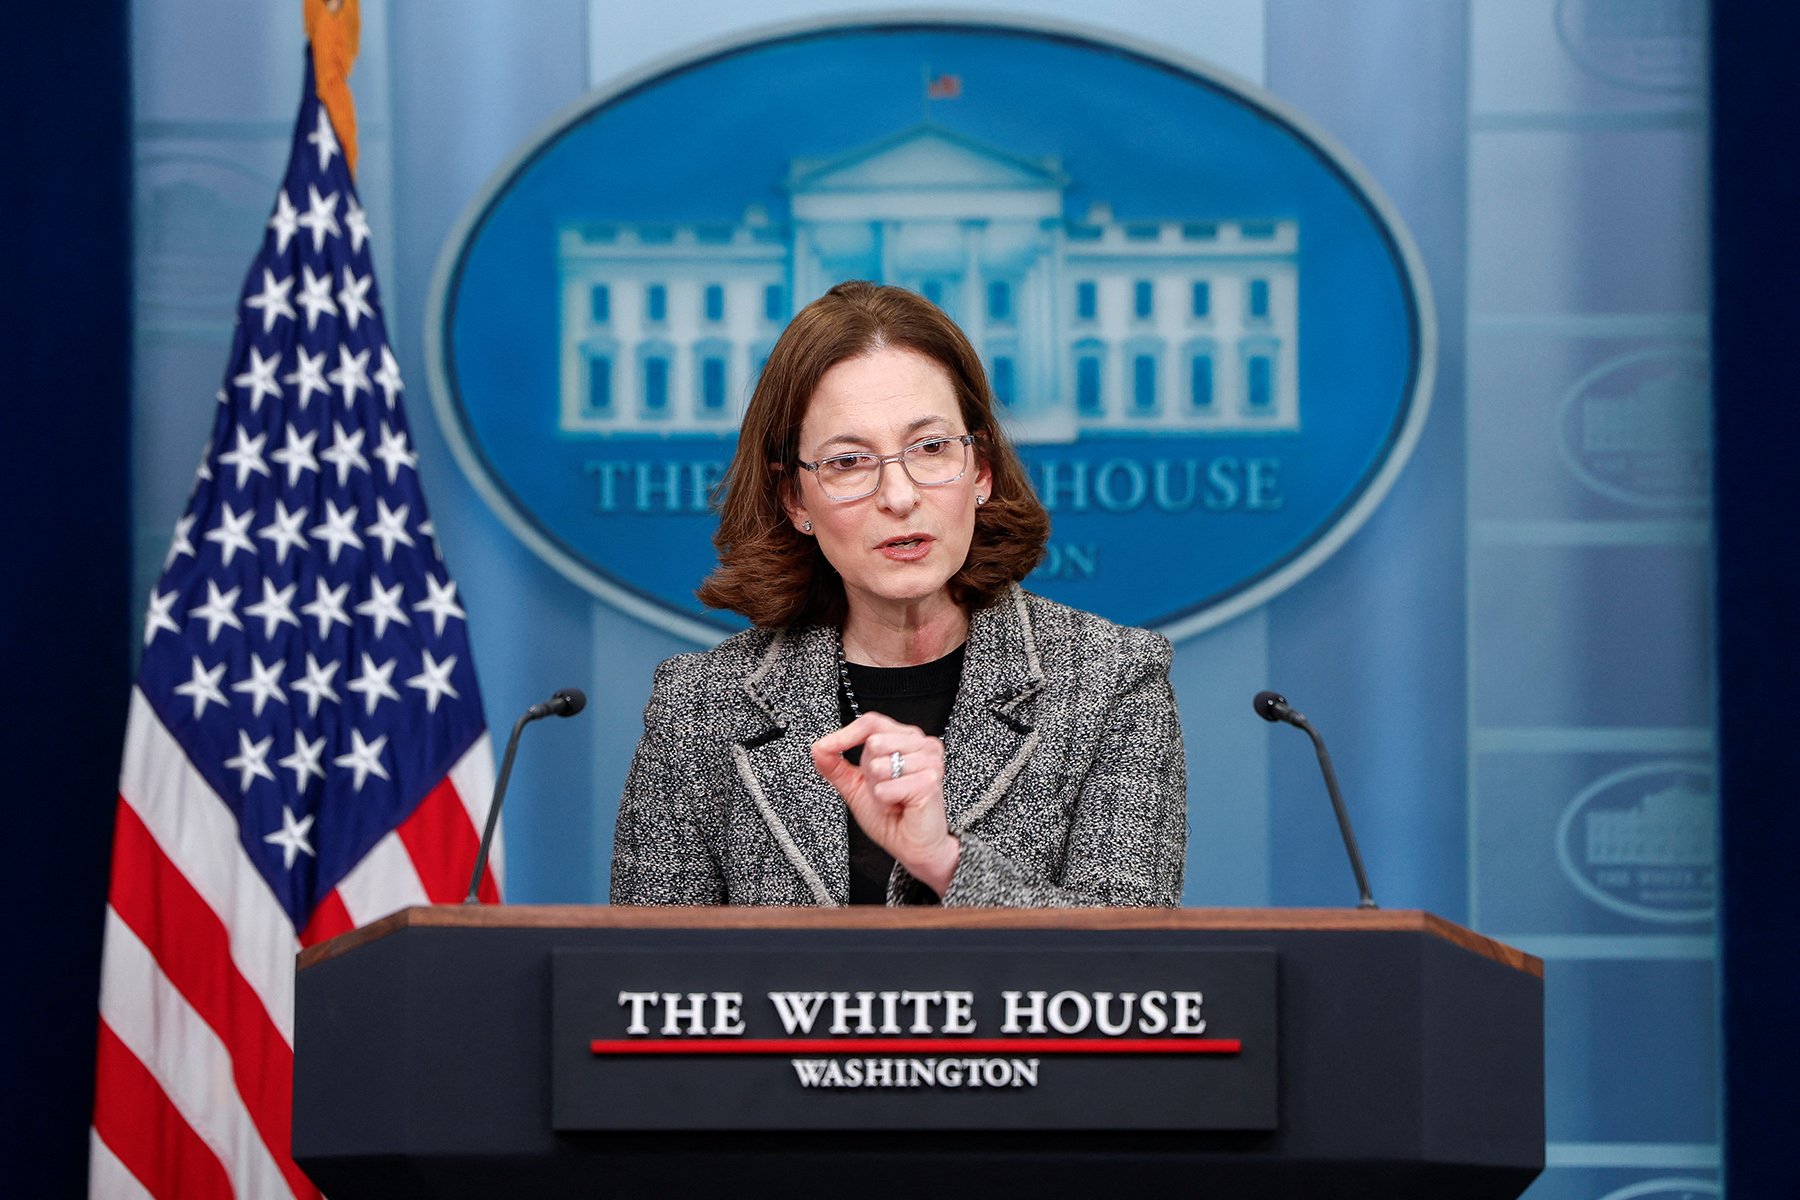 Jennifer Klein, Director of the White House Gender Policy Council, answers questions during the daily press briefing at the White House in Washington